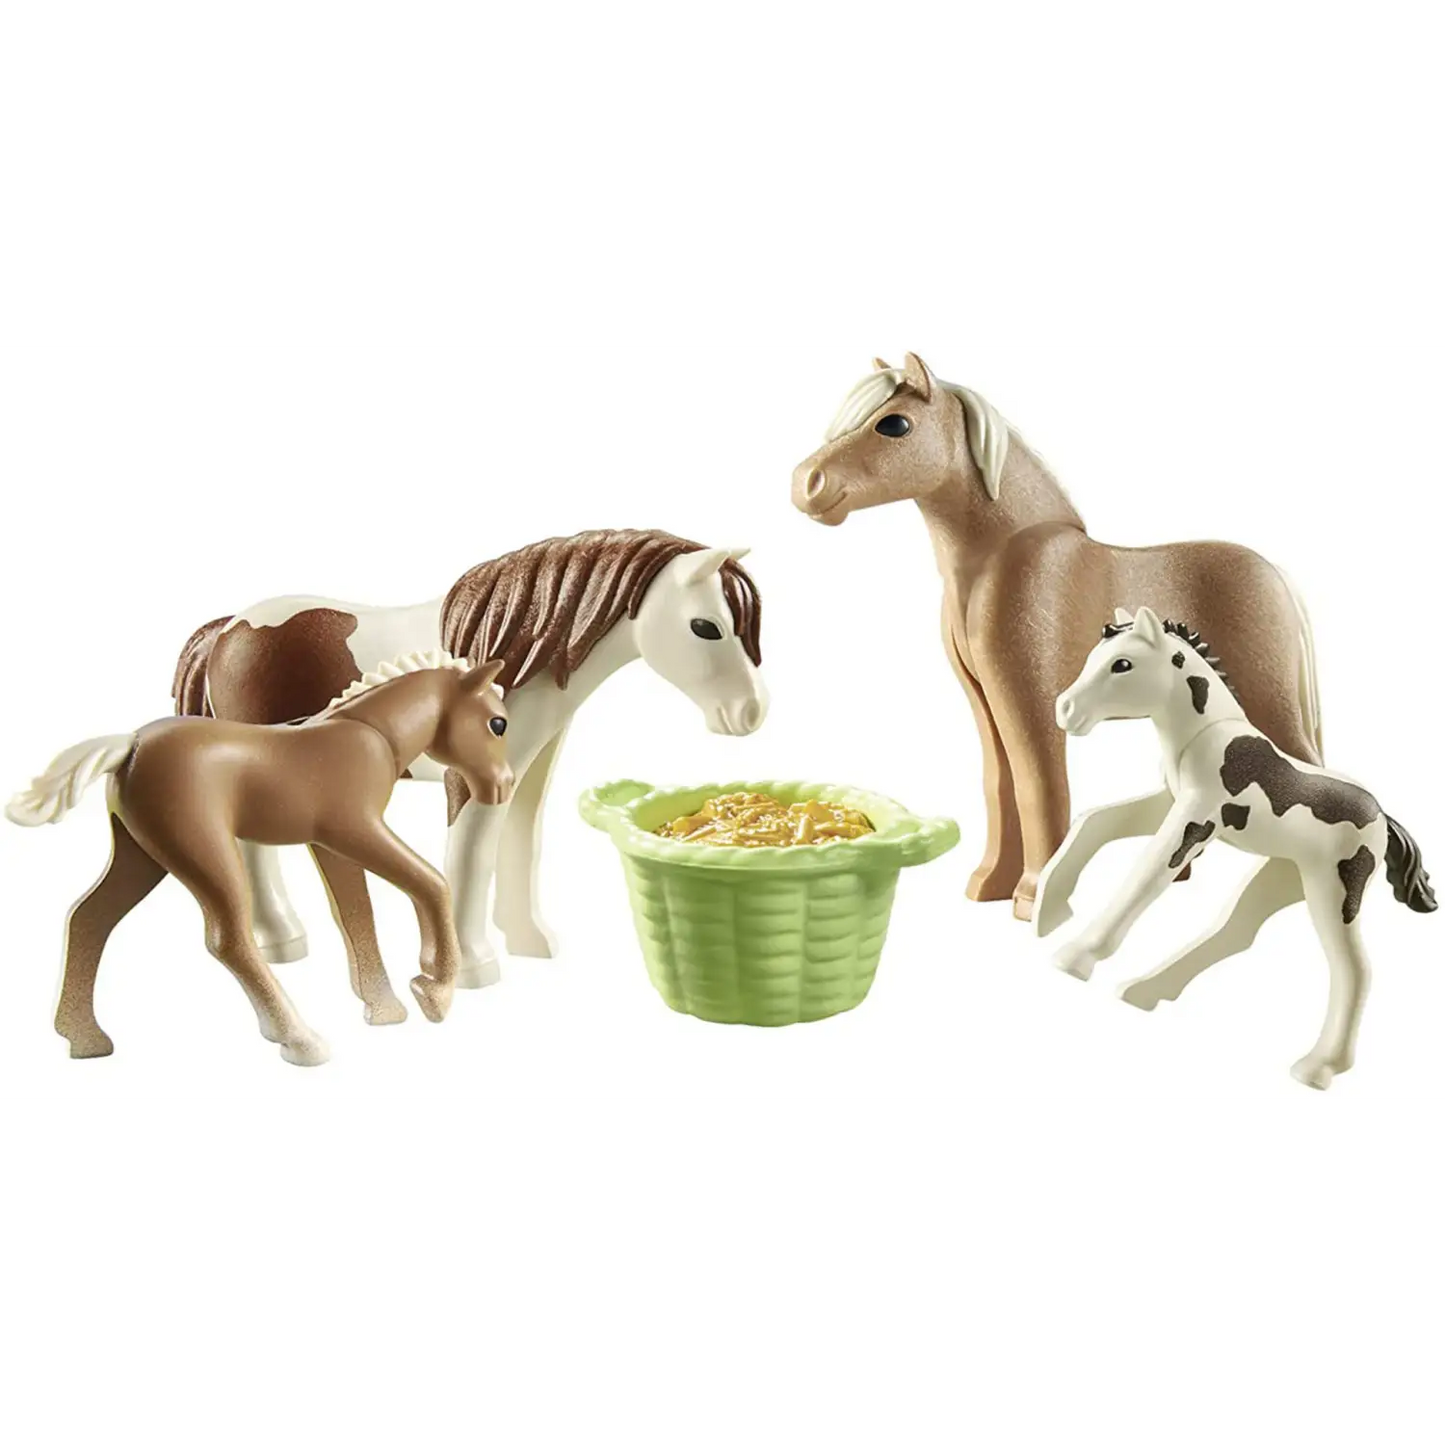 Playmobil Country - Icelandic Ponies w/ Foals 71000 (for